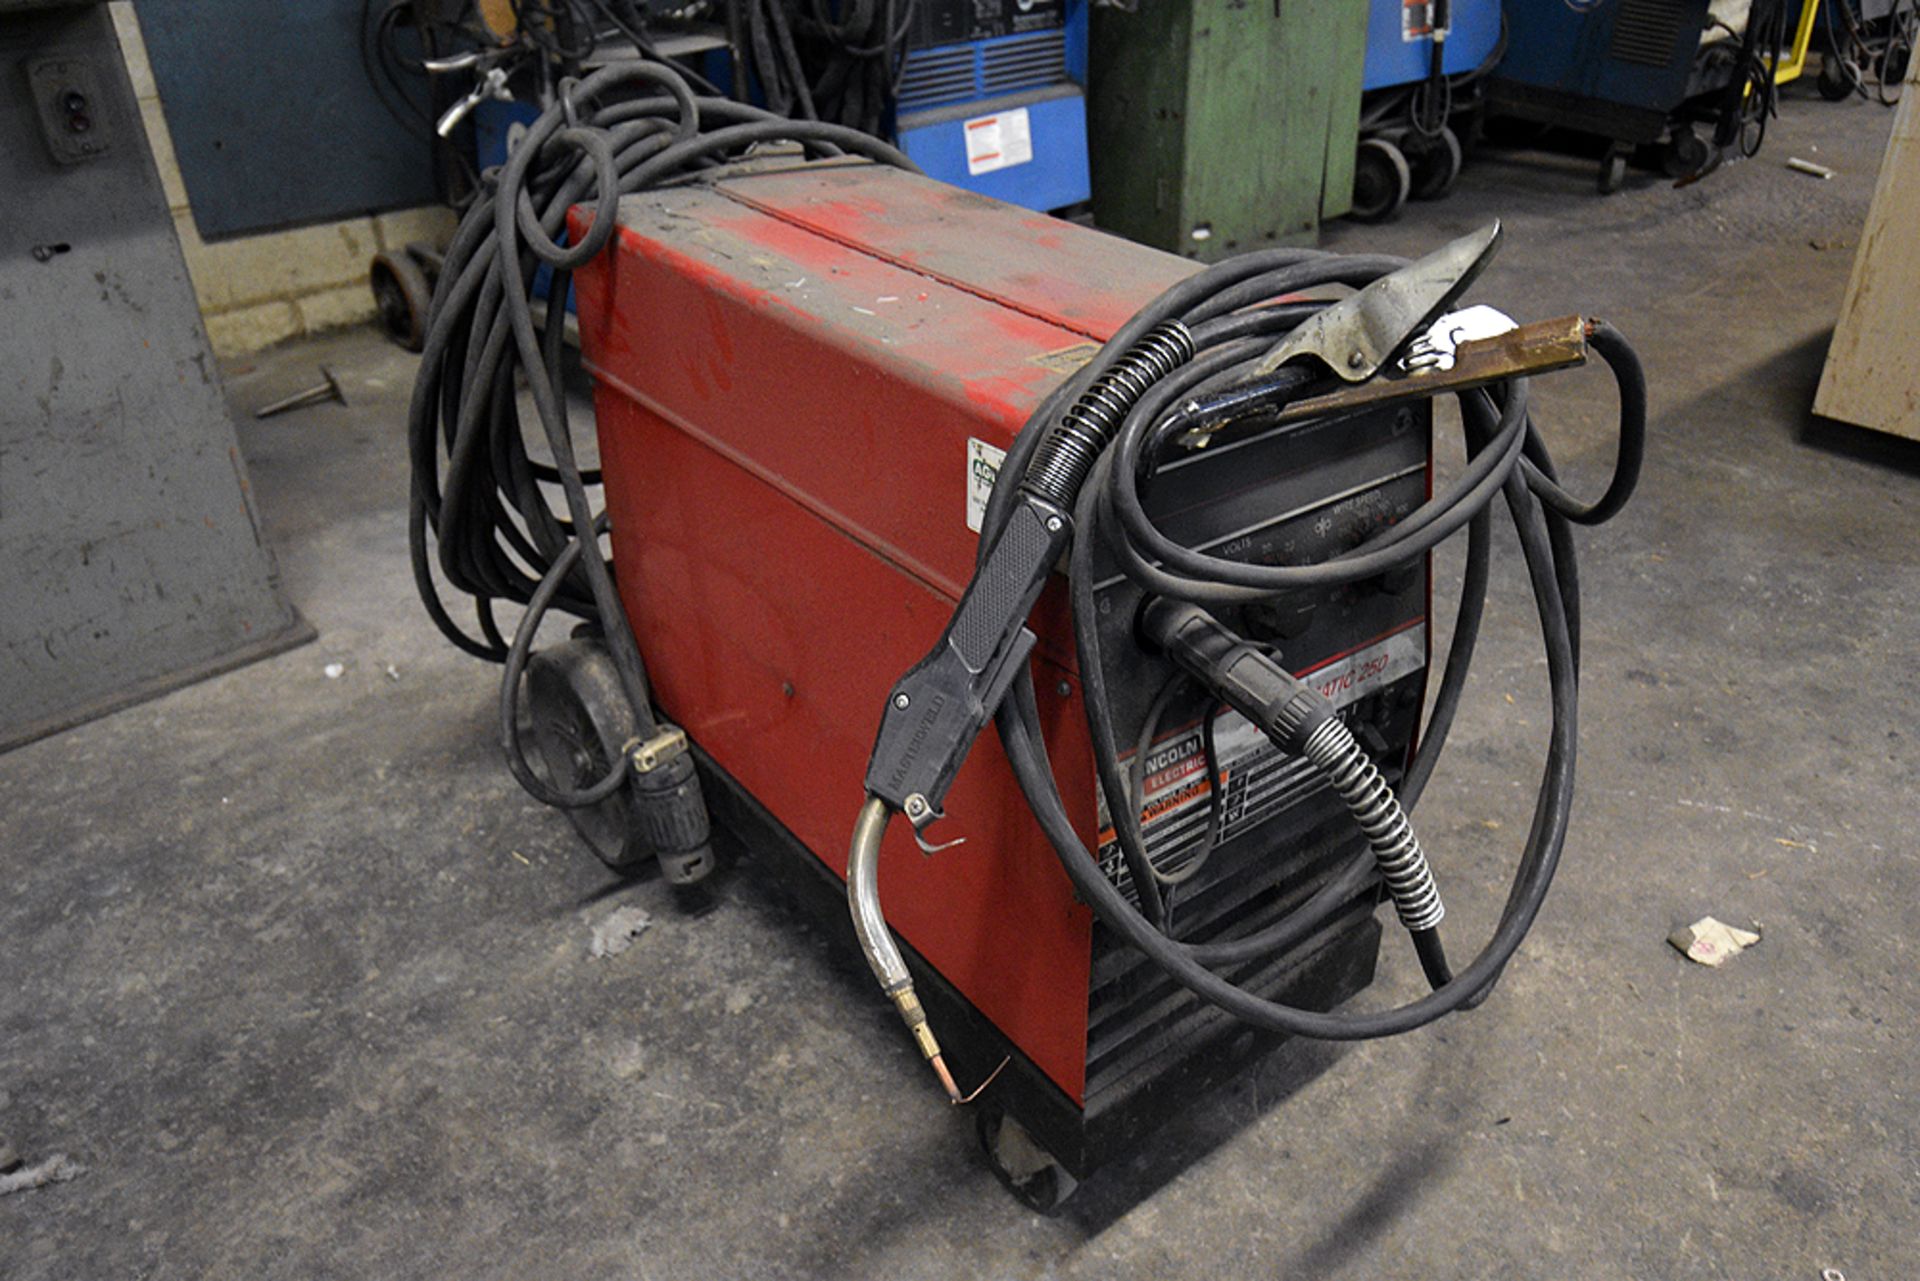 Lincoln Electric Wire-Matic 250 Mig Welder, s/n U1940121992 - Image 2 of 4